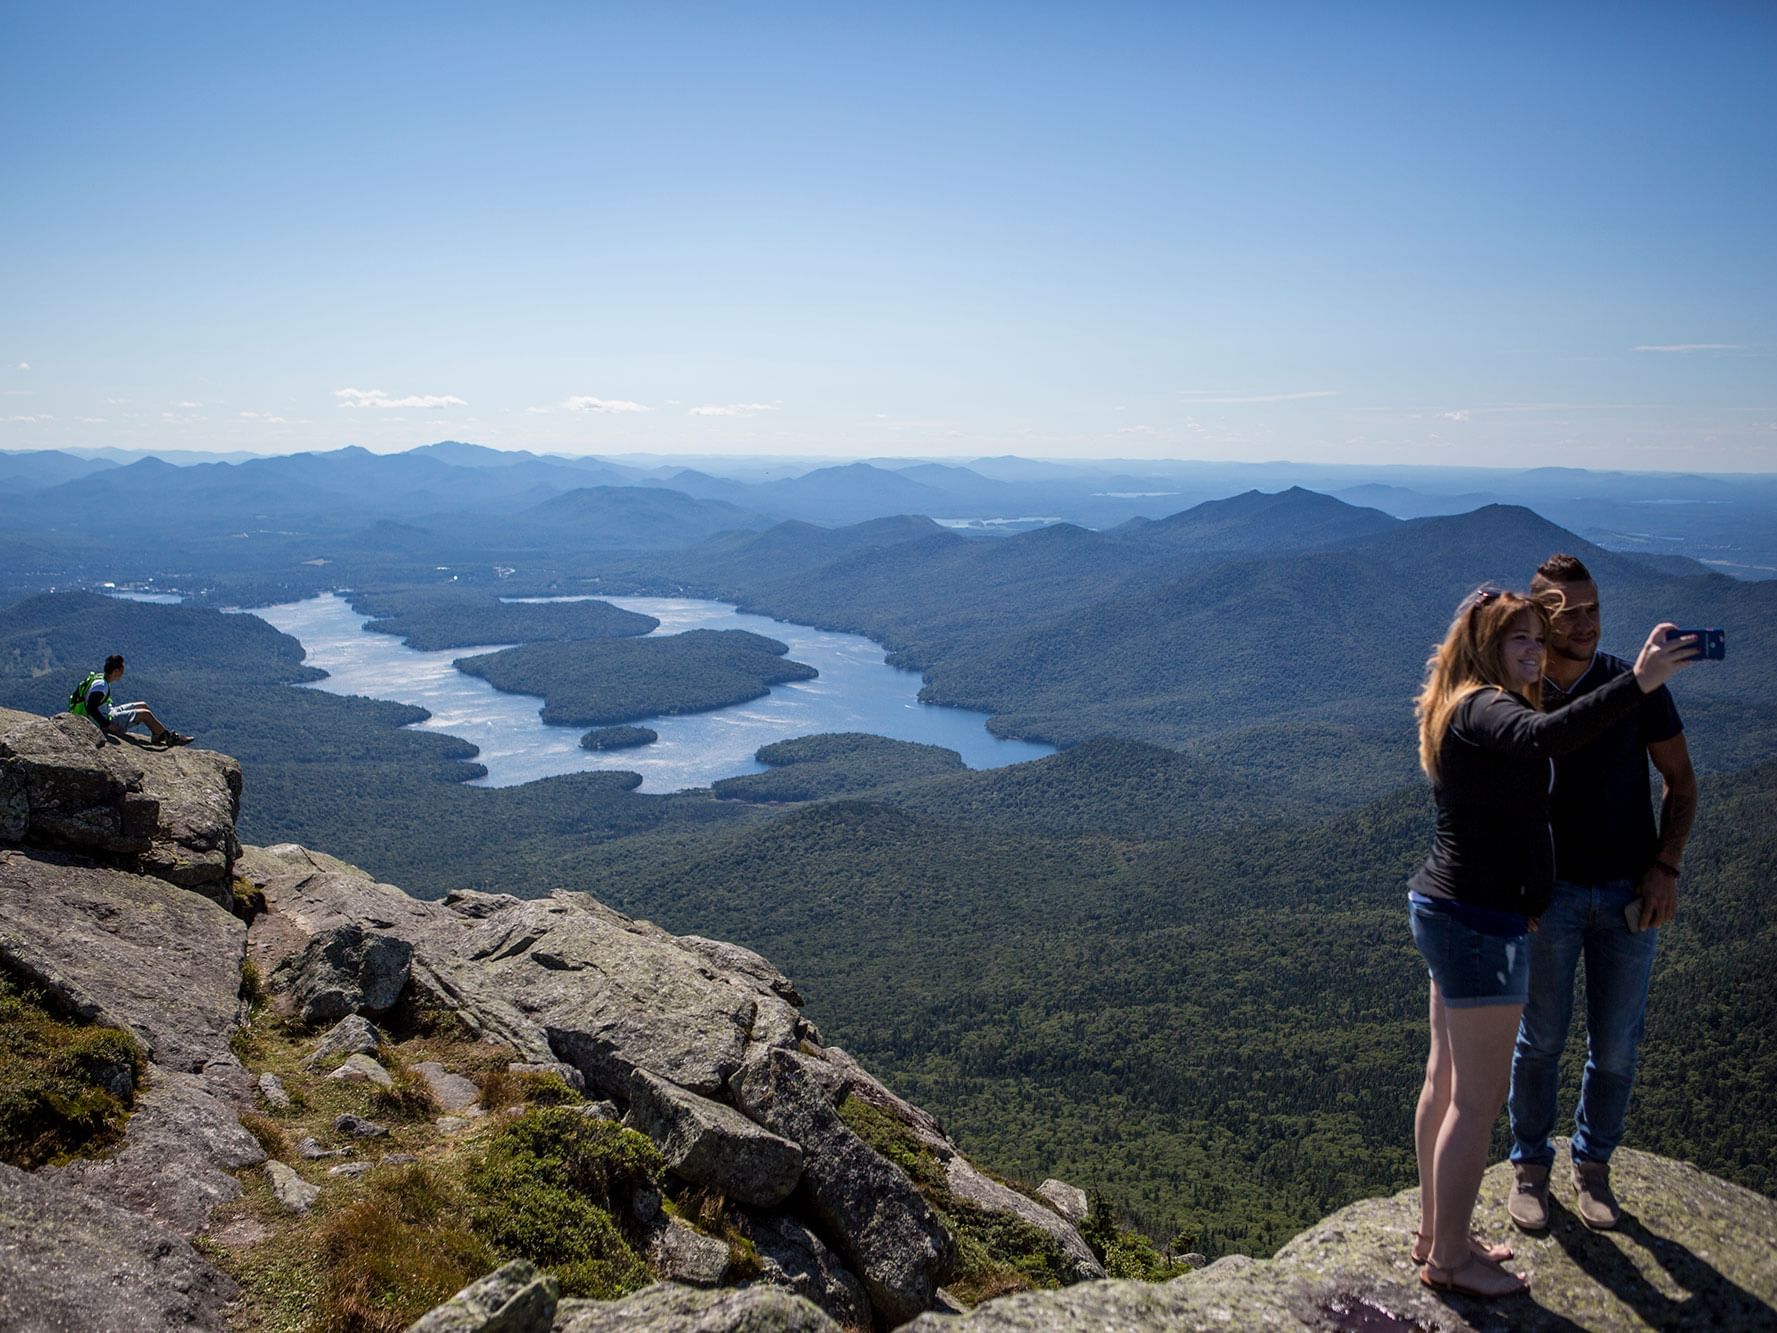 A couple taking photographs in Whiteface Mountain near High Peaks Resort